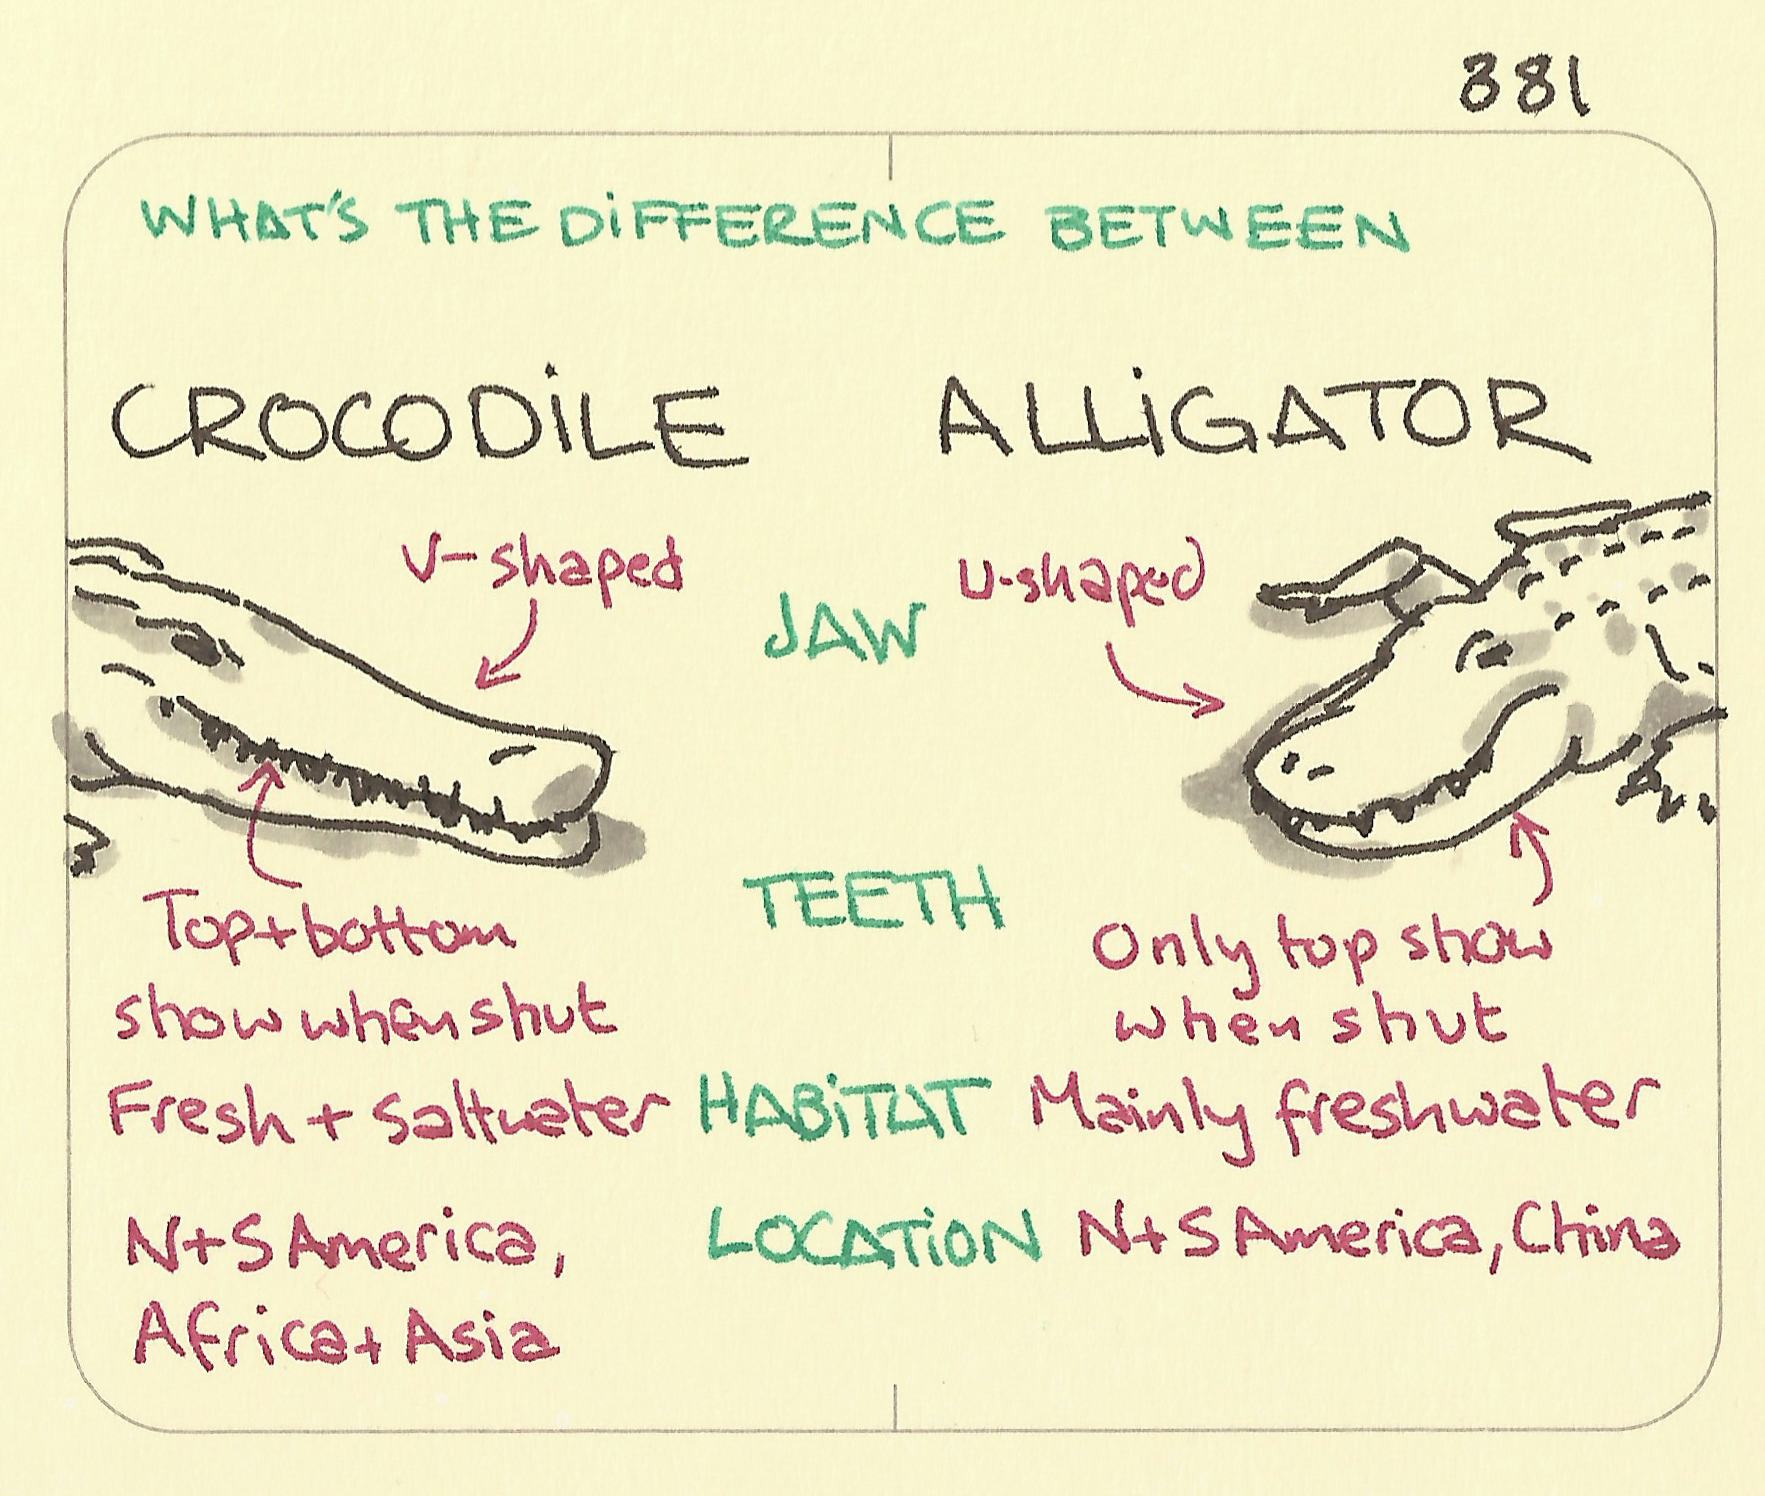 What’s the difference between a crocodile and an alligator - Sketchplanations